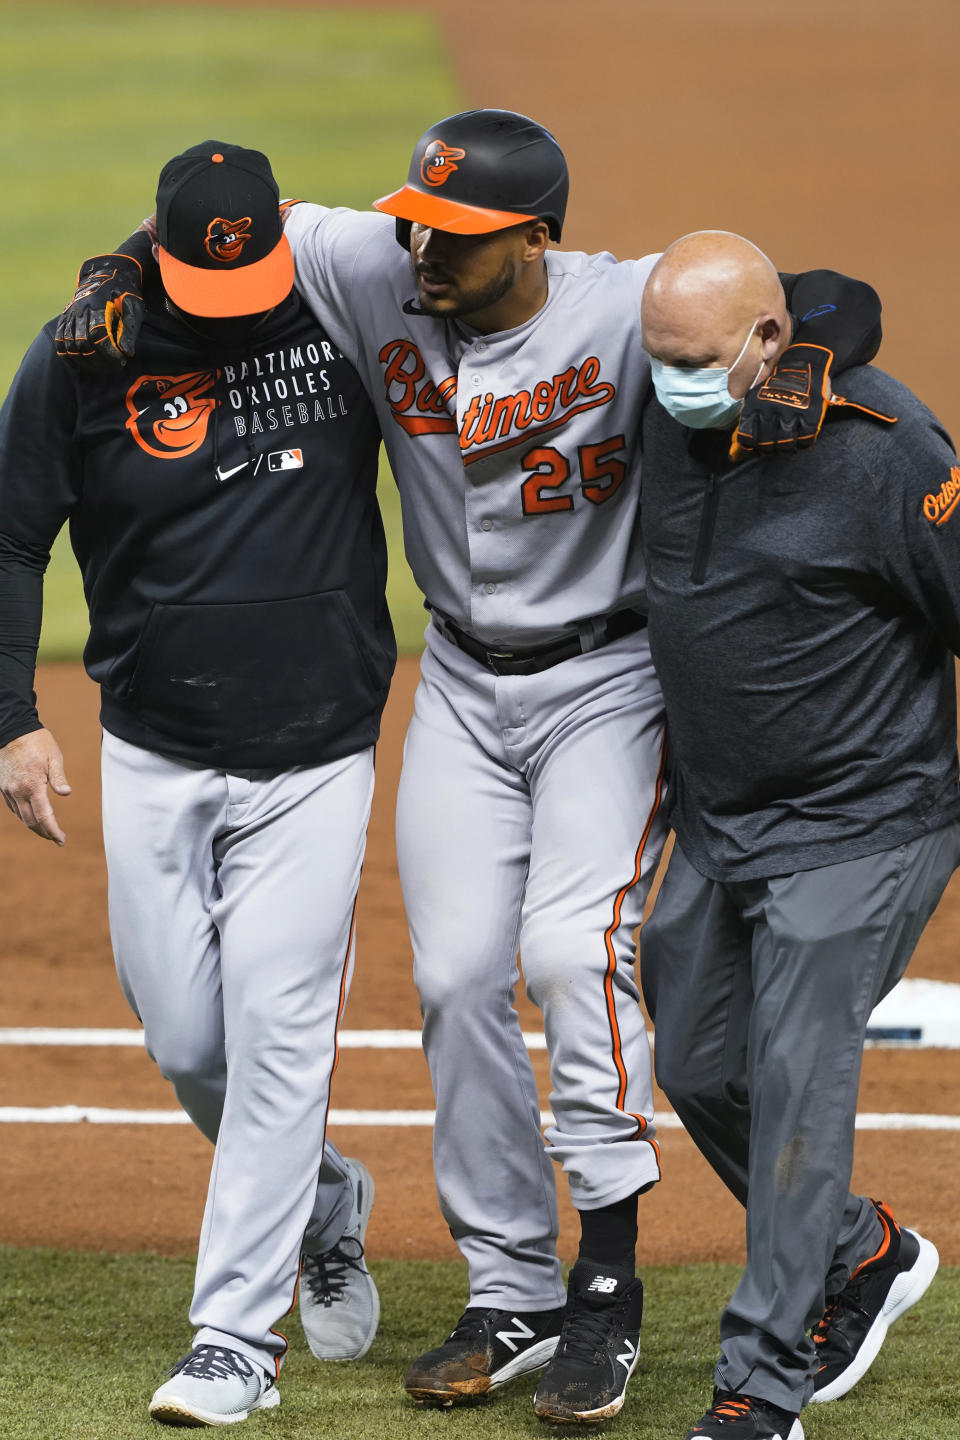 Baltimore Orioles' Anthony Santander (25) is assisted off the field after he was injured during the first inning of a baseball game against the Miami Marlins, Tuesday, April 20, 2021, in Miami. (AP Photo/Marta Lavandier)